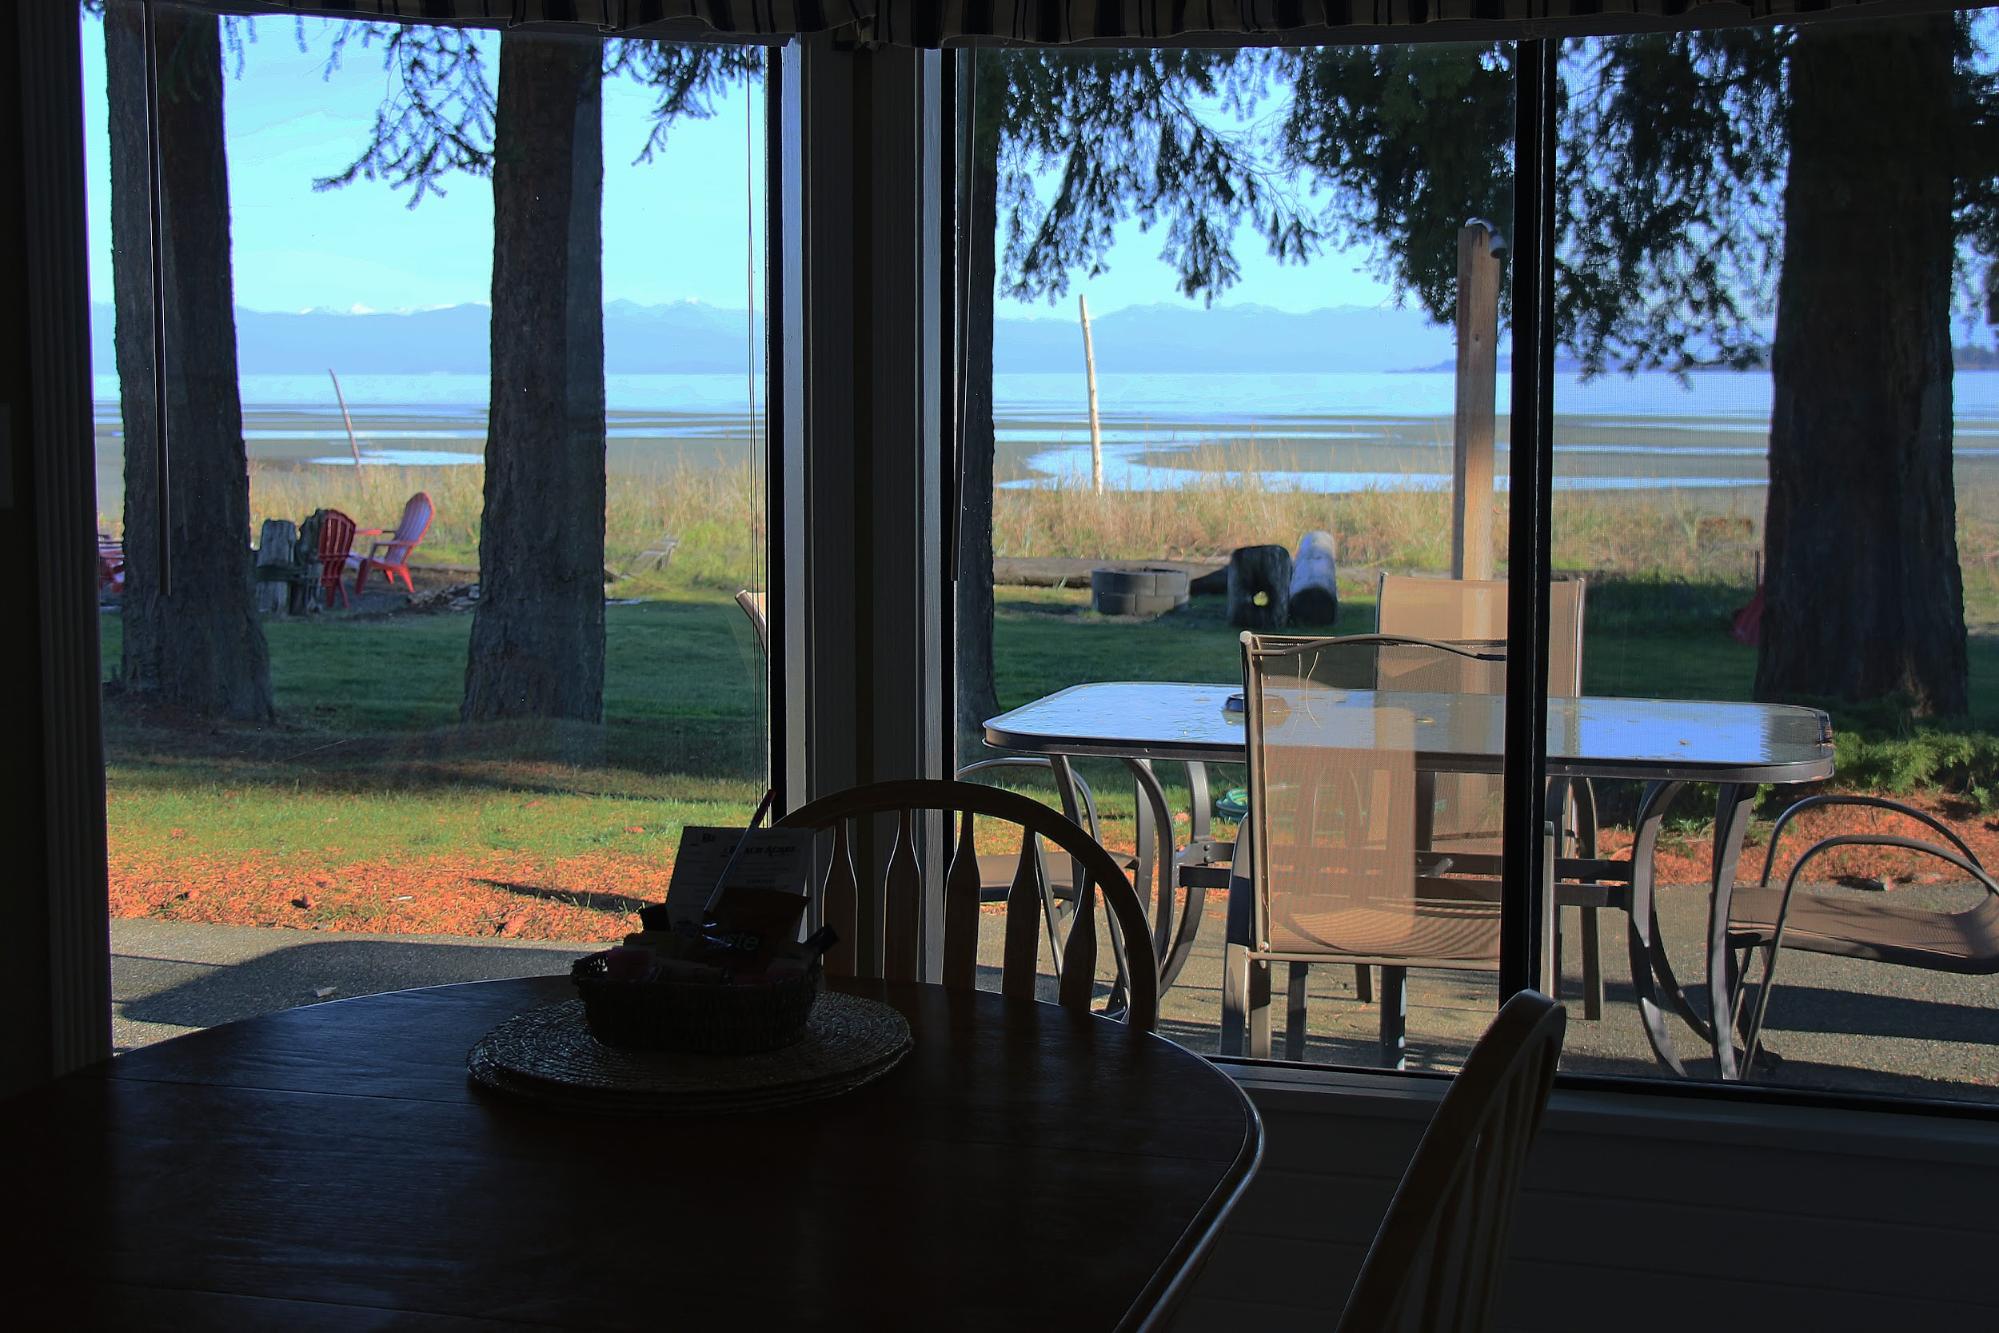 The view from the window of a beach-front accommodation looks out over the water.